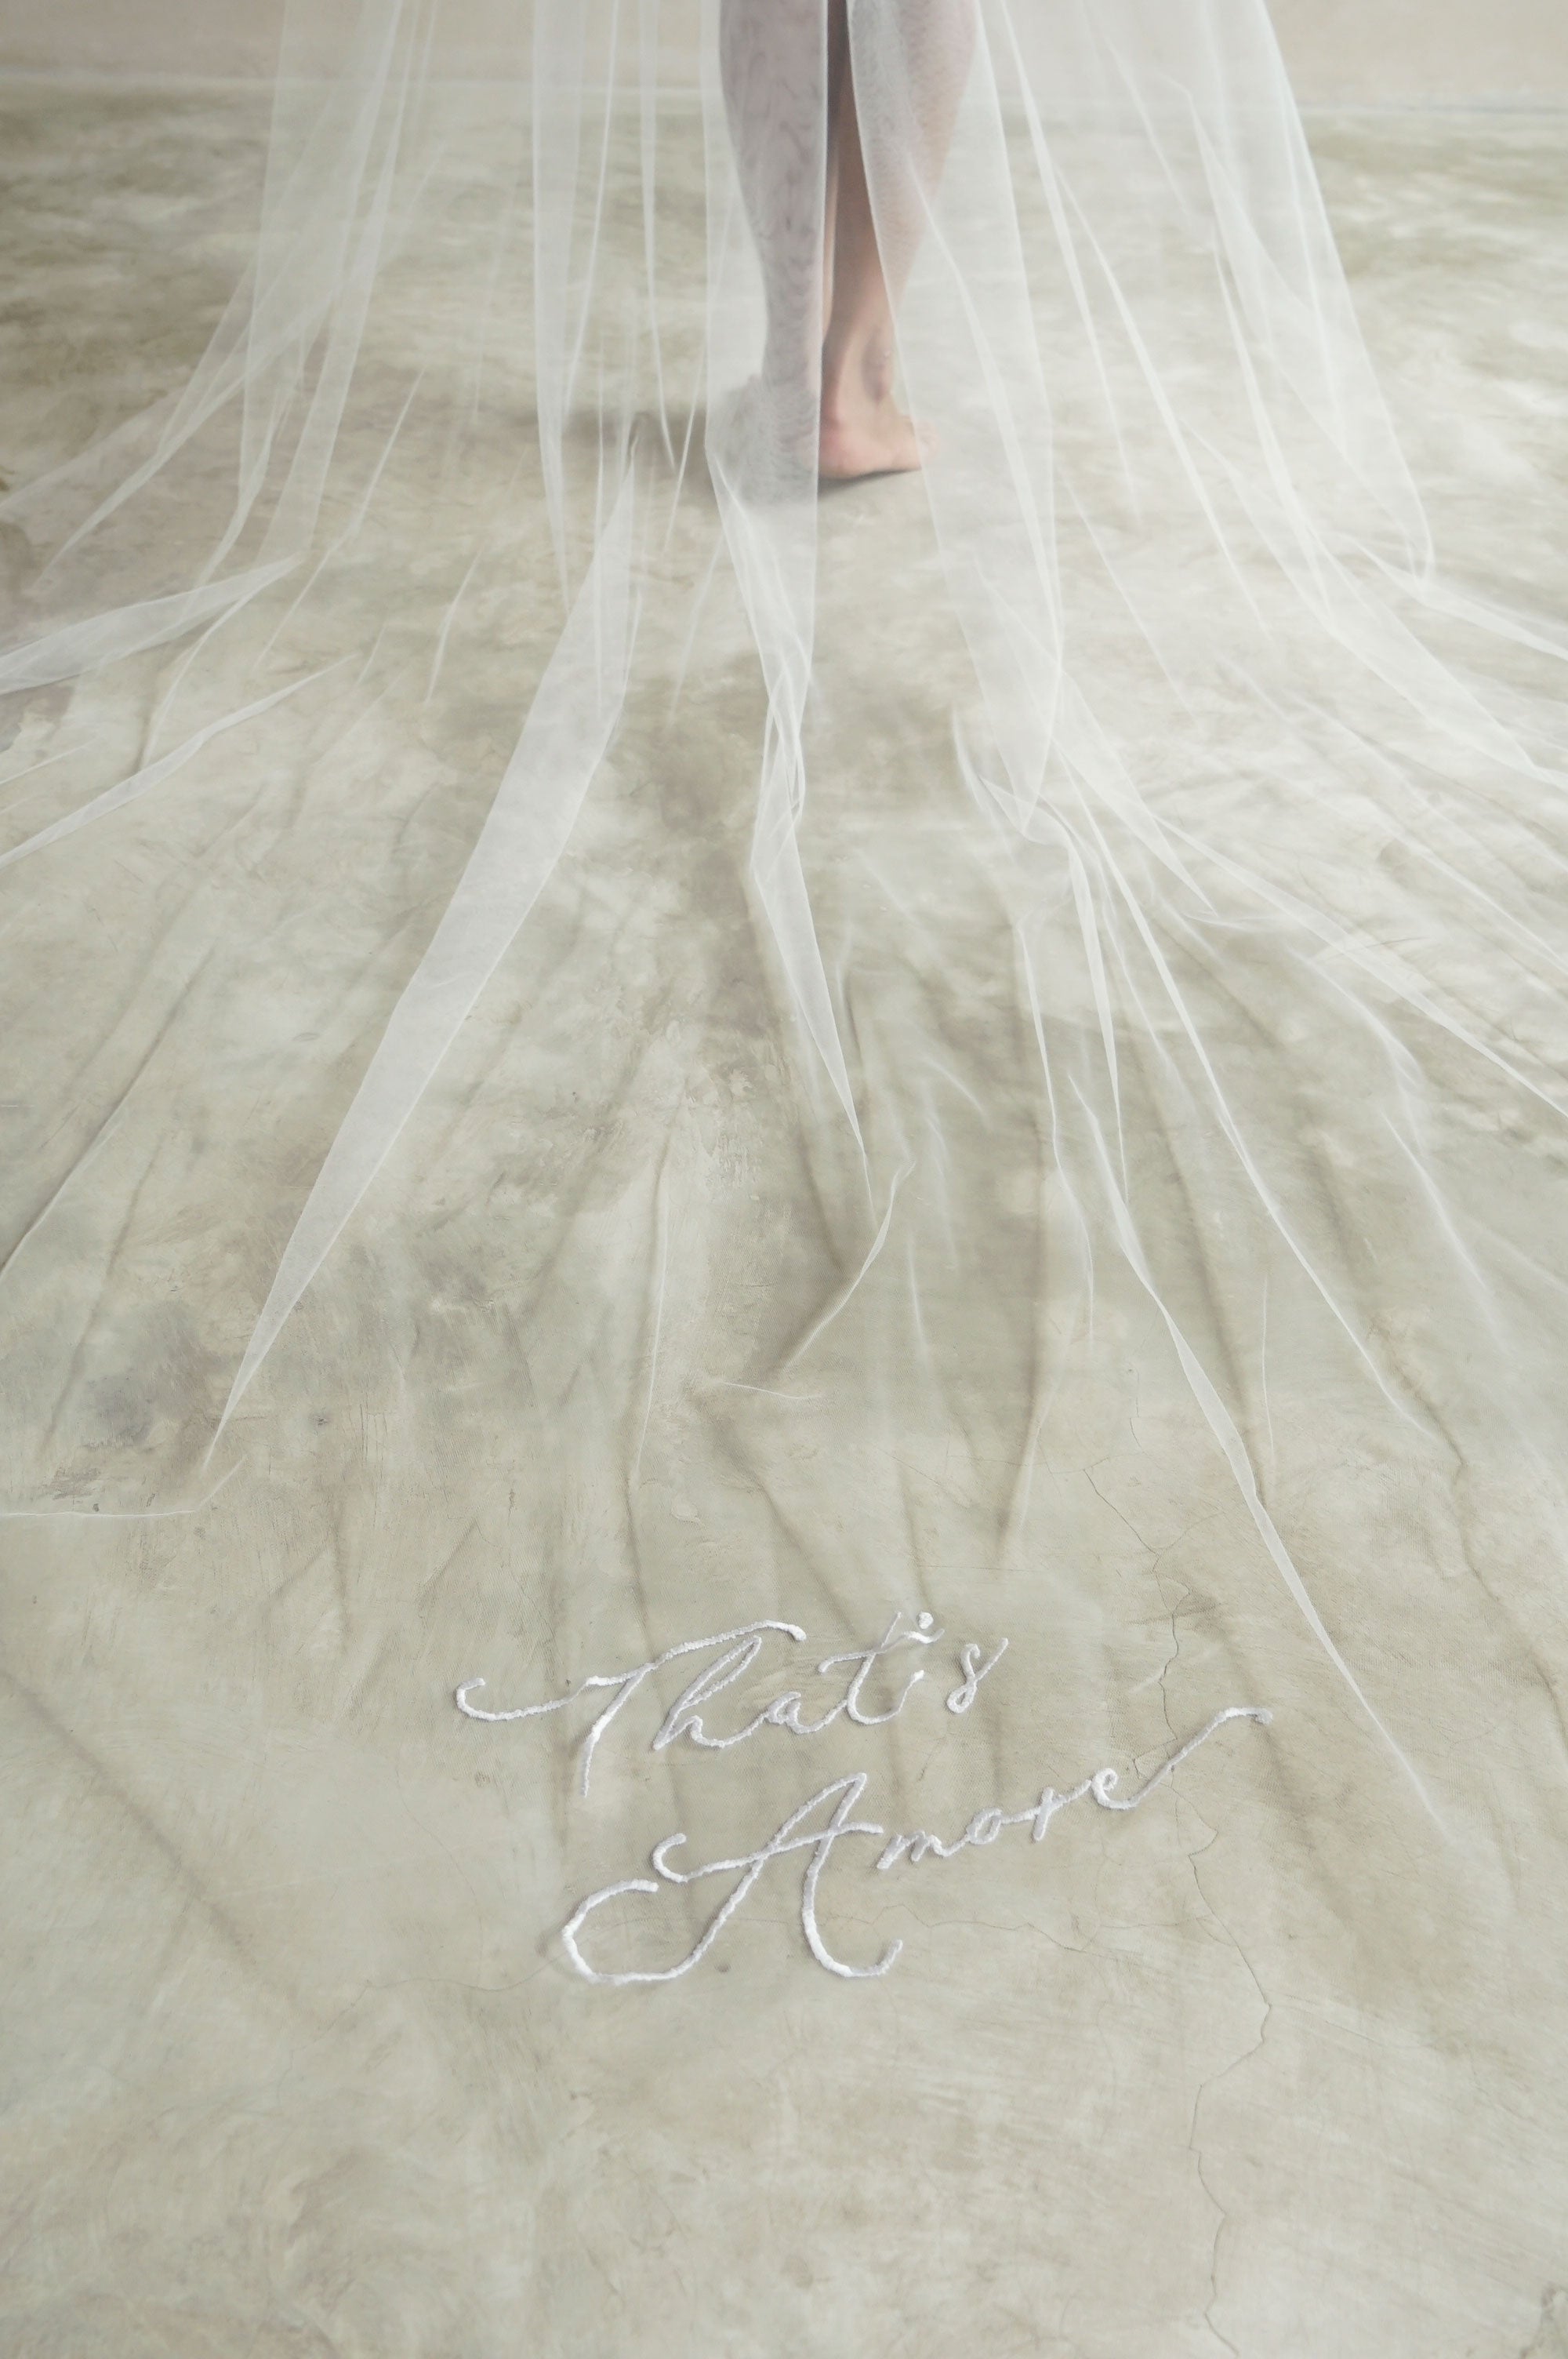 A model wearing a veil with embroidery text that's amore